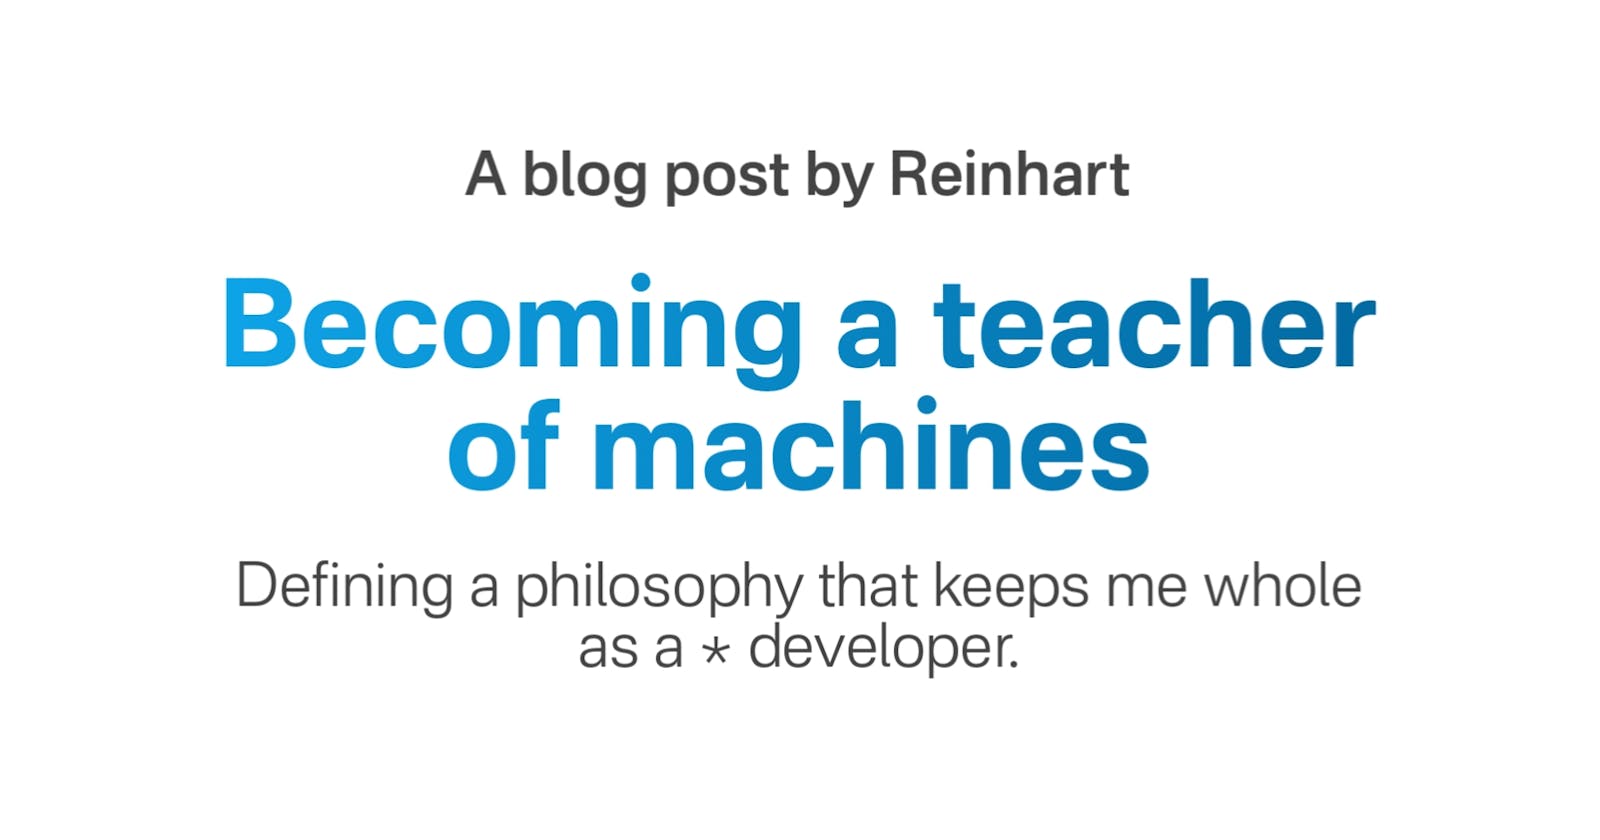 Becoming a teacher of machines: Defining a philosophy that keeps me whole as a * developer.